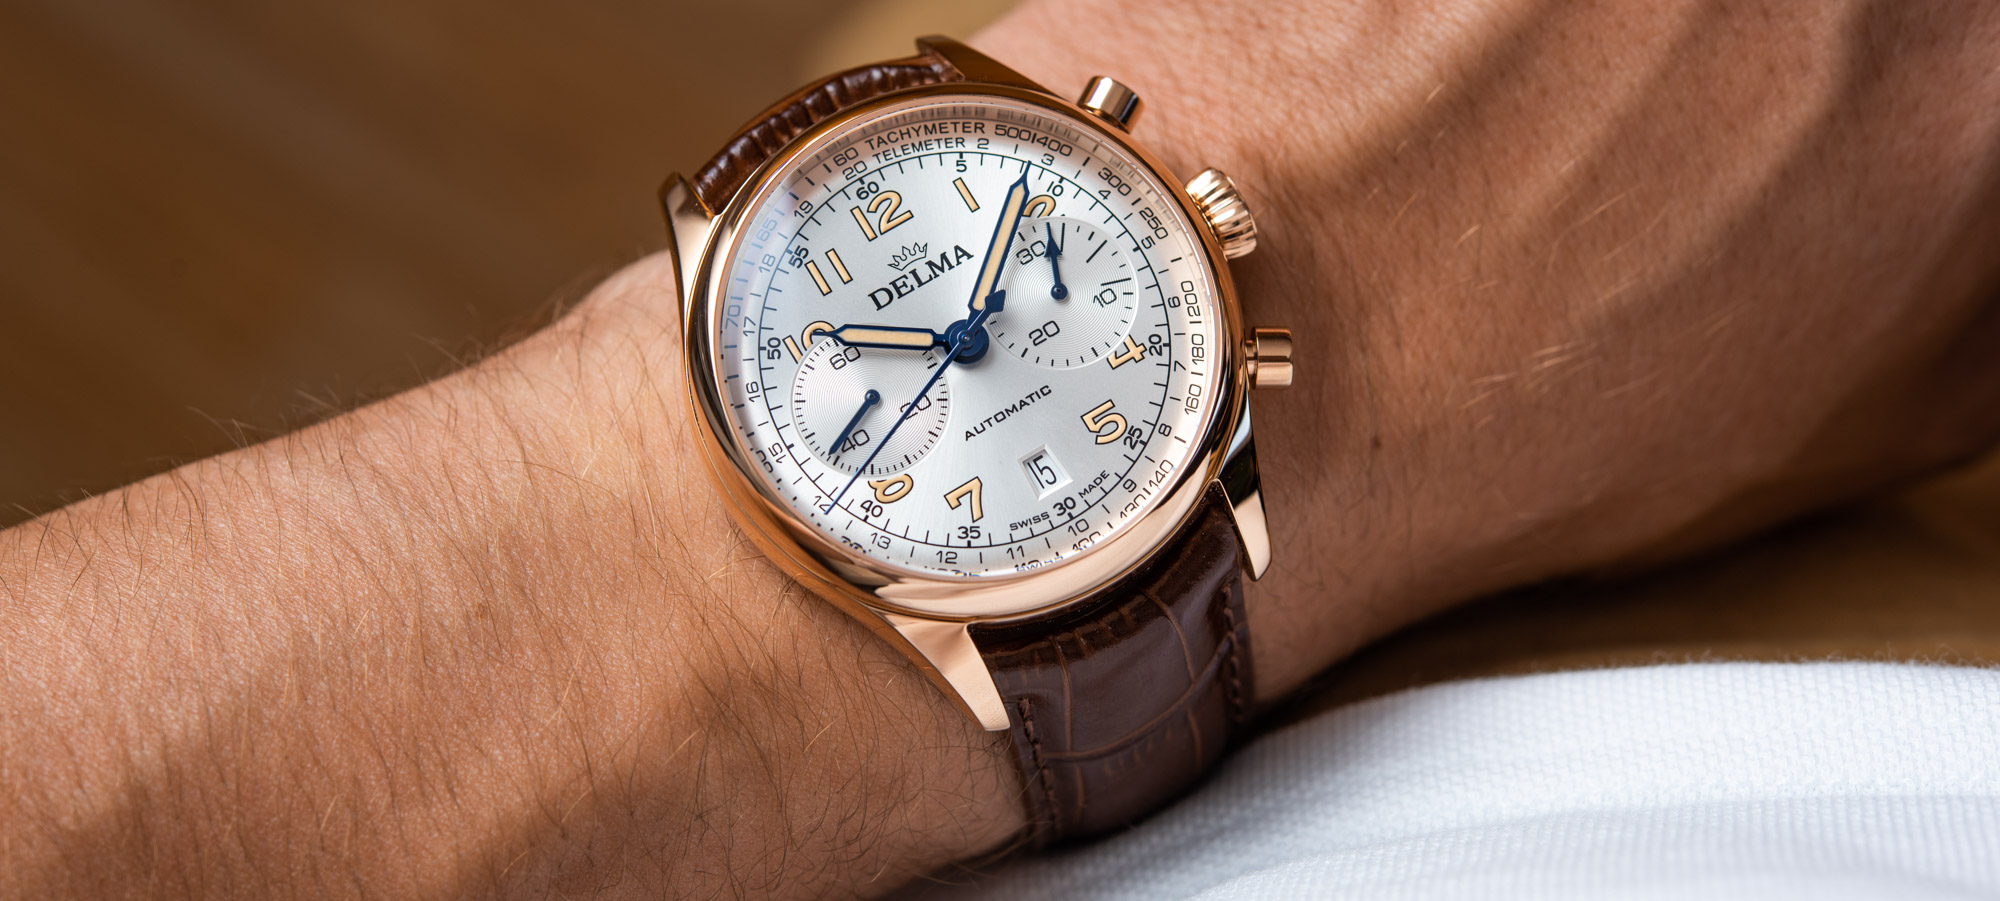 Watch Review: Delma Heritage Chronograph